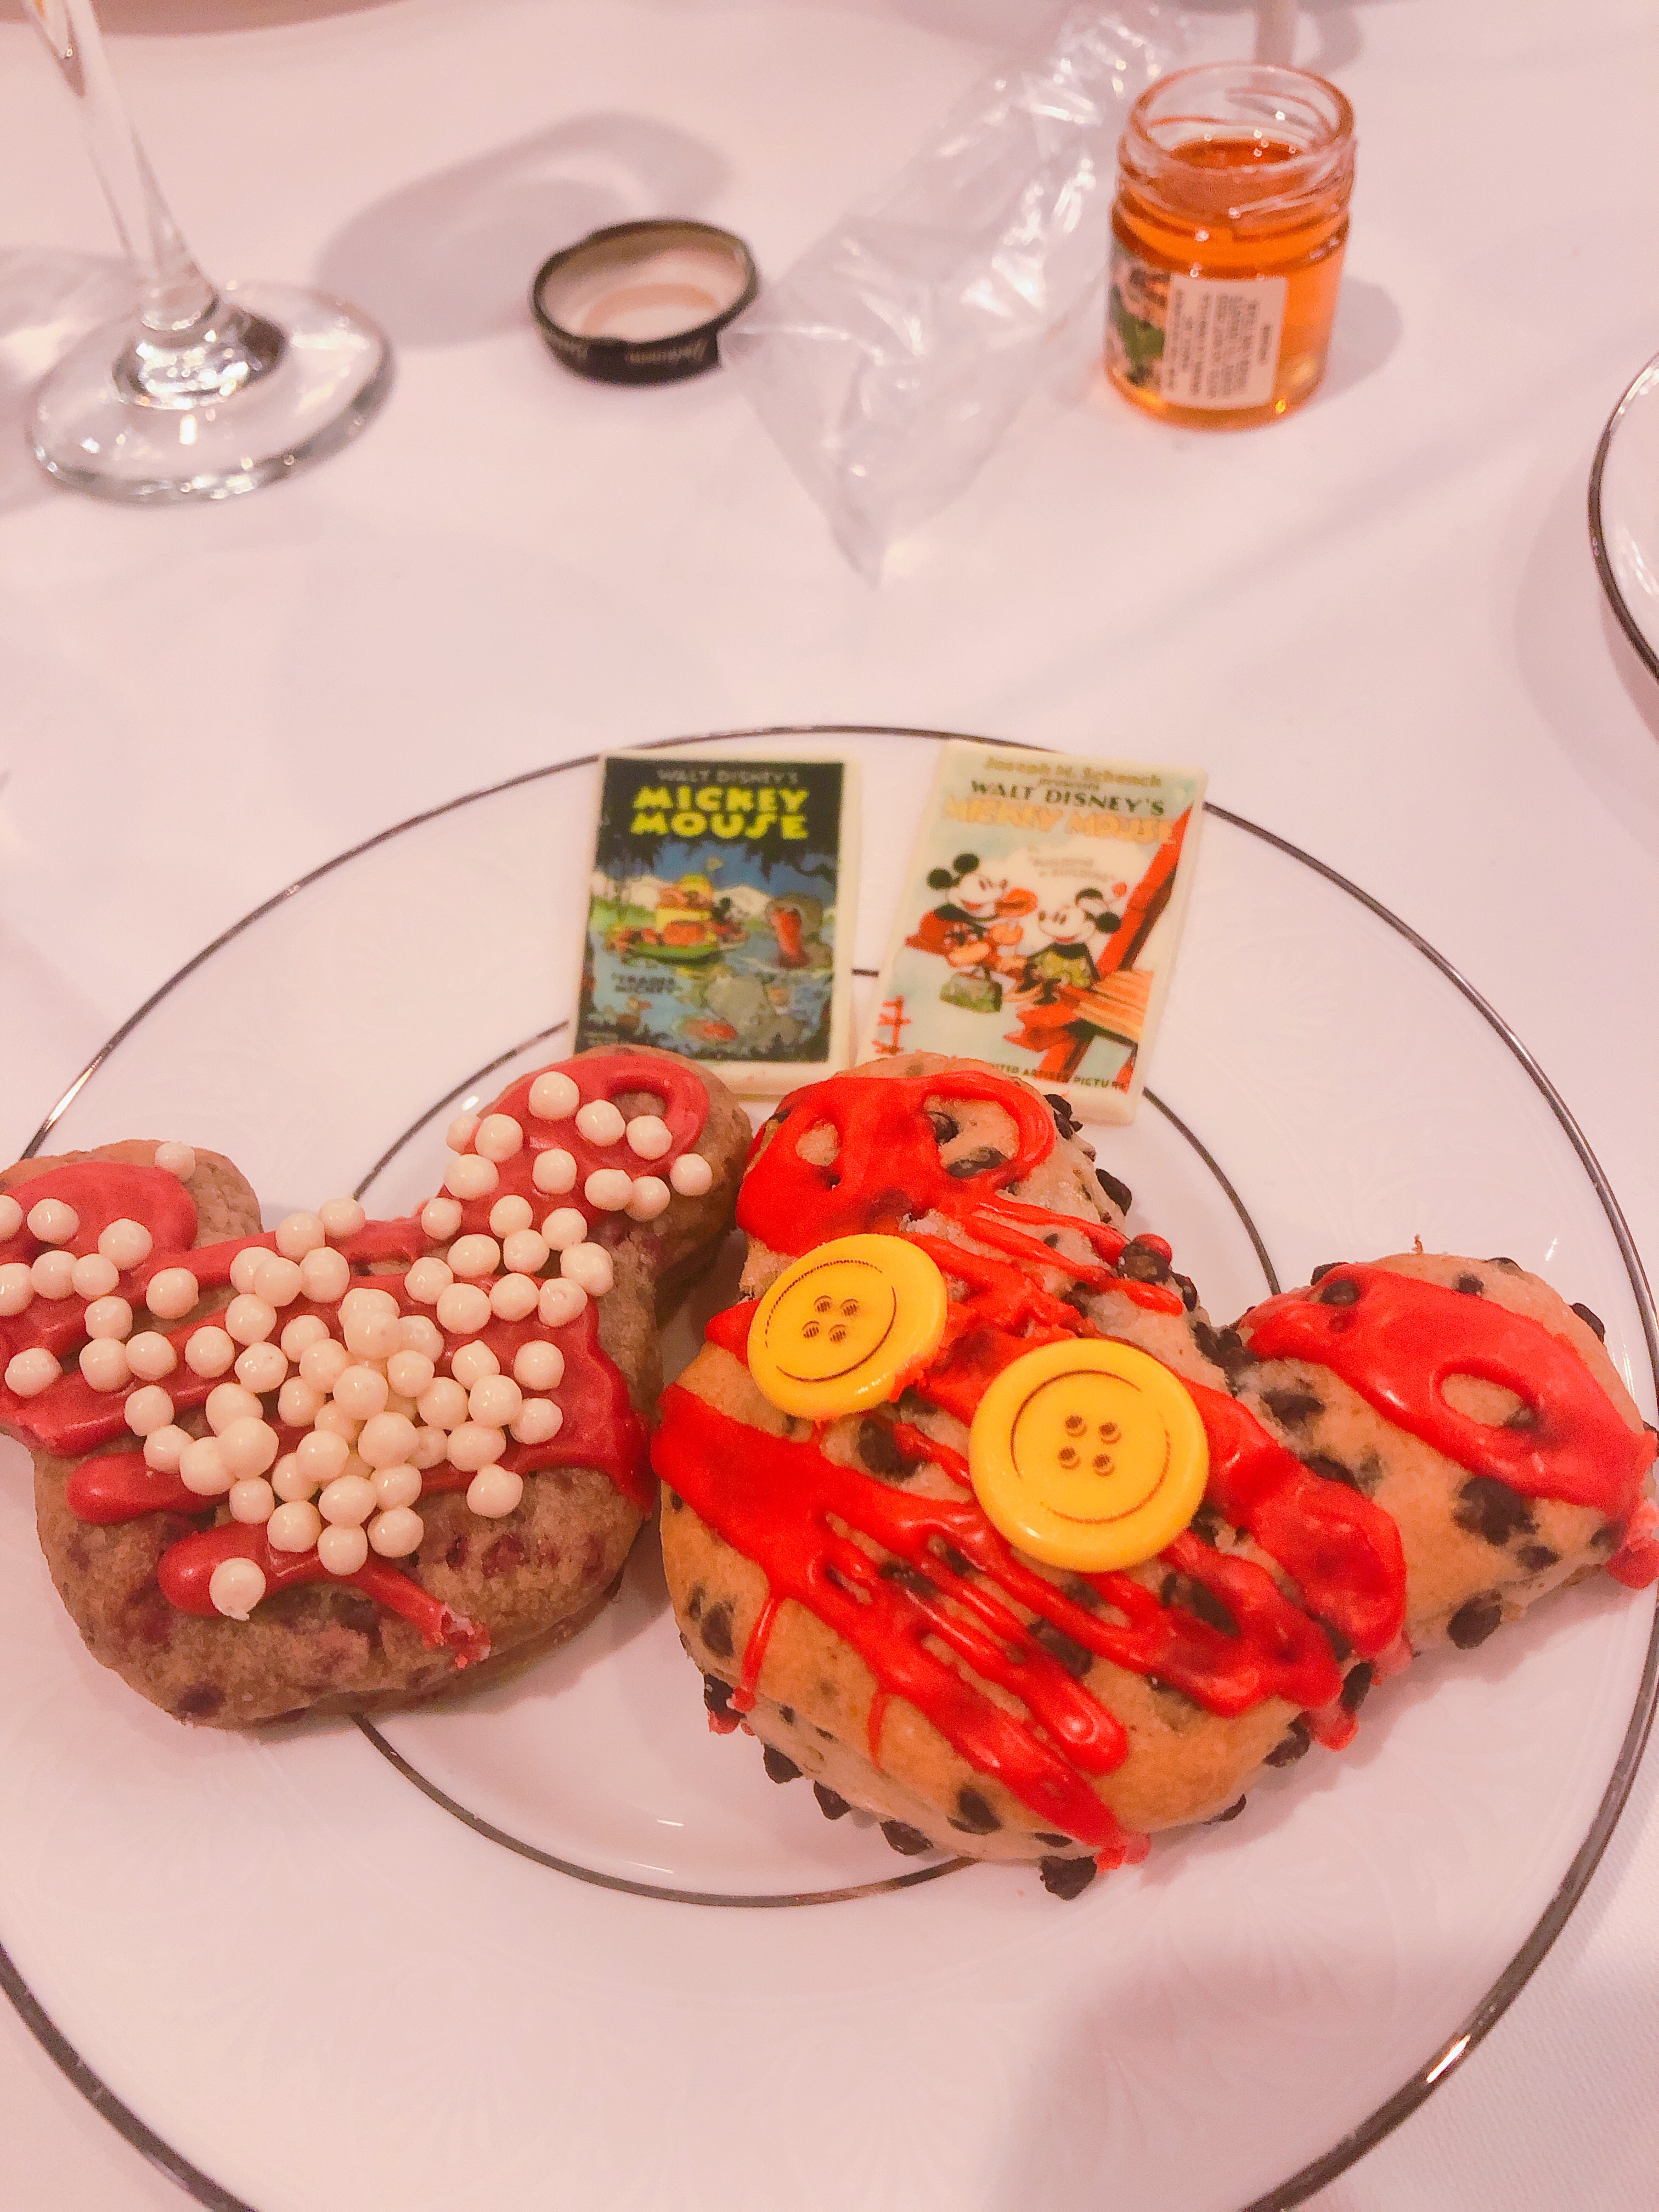 A picture of the Mickey and Minnie themed scones offered at the Mickey's Tea Party Celebration. the Minnie scone was raspberry and the Mickey scone was chocolate chip.